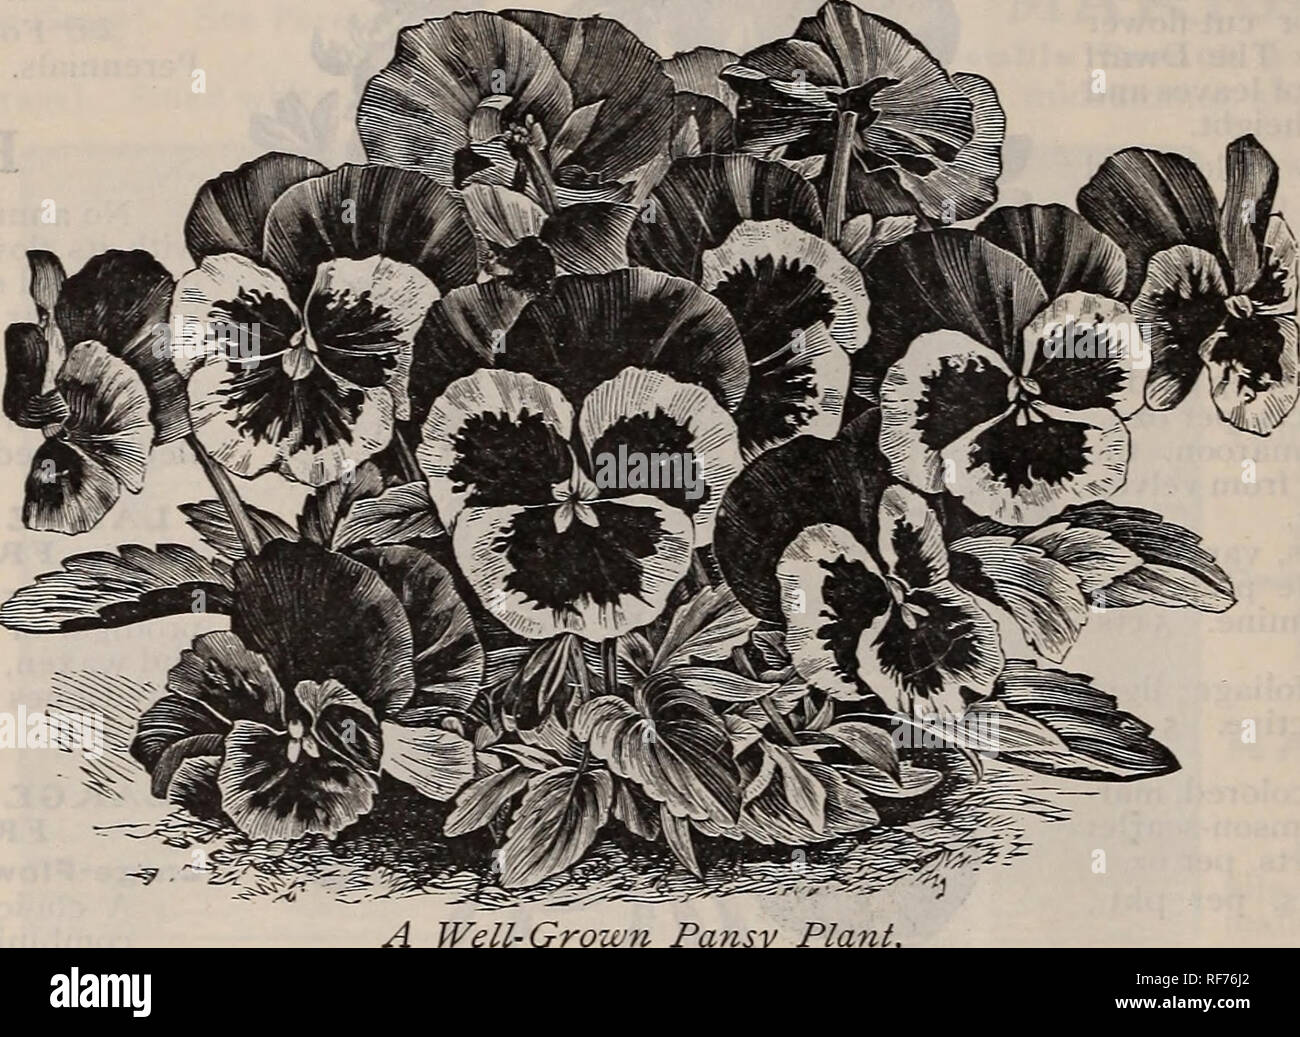 . Seeds and implements. Nursery stock Rhode Island Providence Catalogs; Vegetables Seeds Catalogs; Flowers Seeds Catalogs; Agricultural implements Catalogs. Select Flotoer Seeds .26. THE W. E. BARRETT COMPANY PROVIDENCE, RHODE ISLAND Pansies We wish to call especial attention to our large and fine assort- ment of Pansy seed, which includes all famous and distinct large- flowering strains, and in separate colors all the most desirable shades and blendings. The collection is quite complete, and contains only the finest and purest strains. A garden without Pansies is an anomaly now-a-days, for th Stock Photo